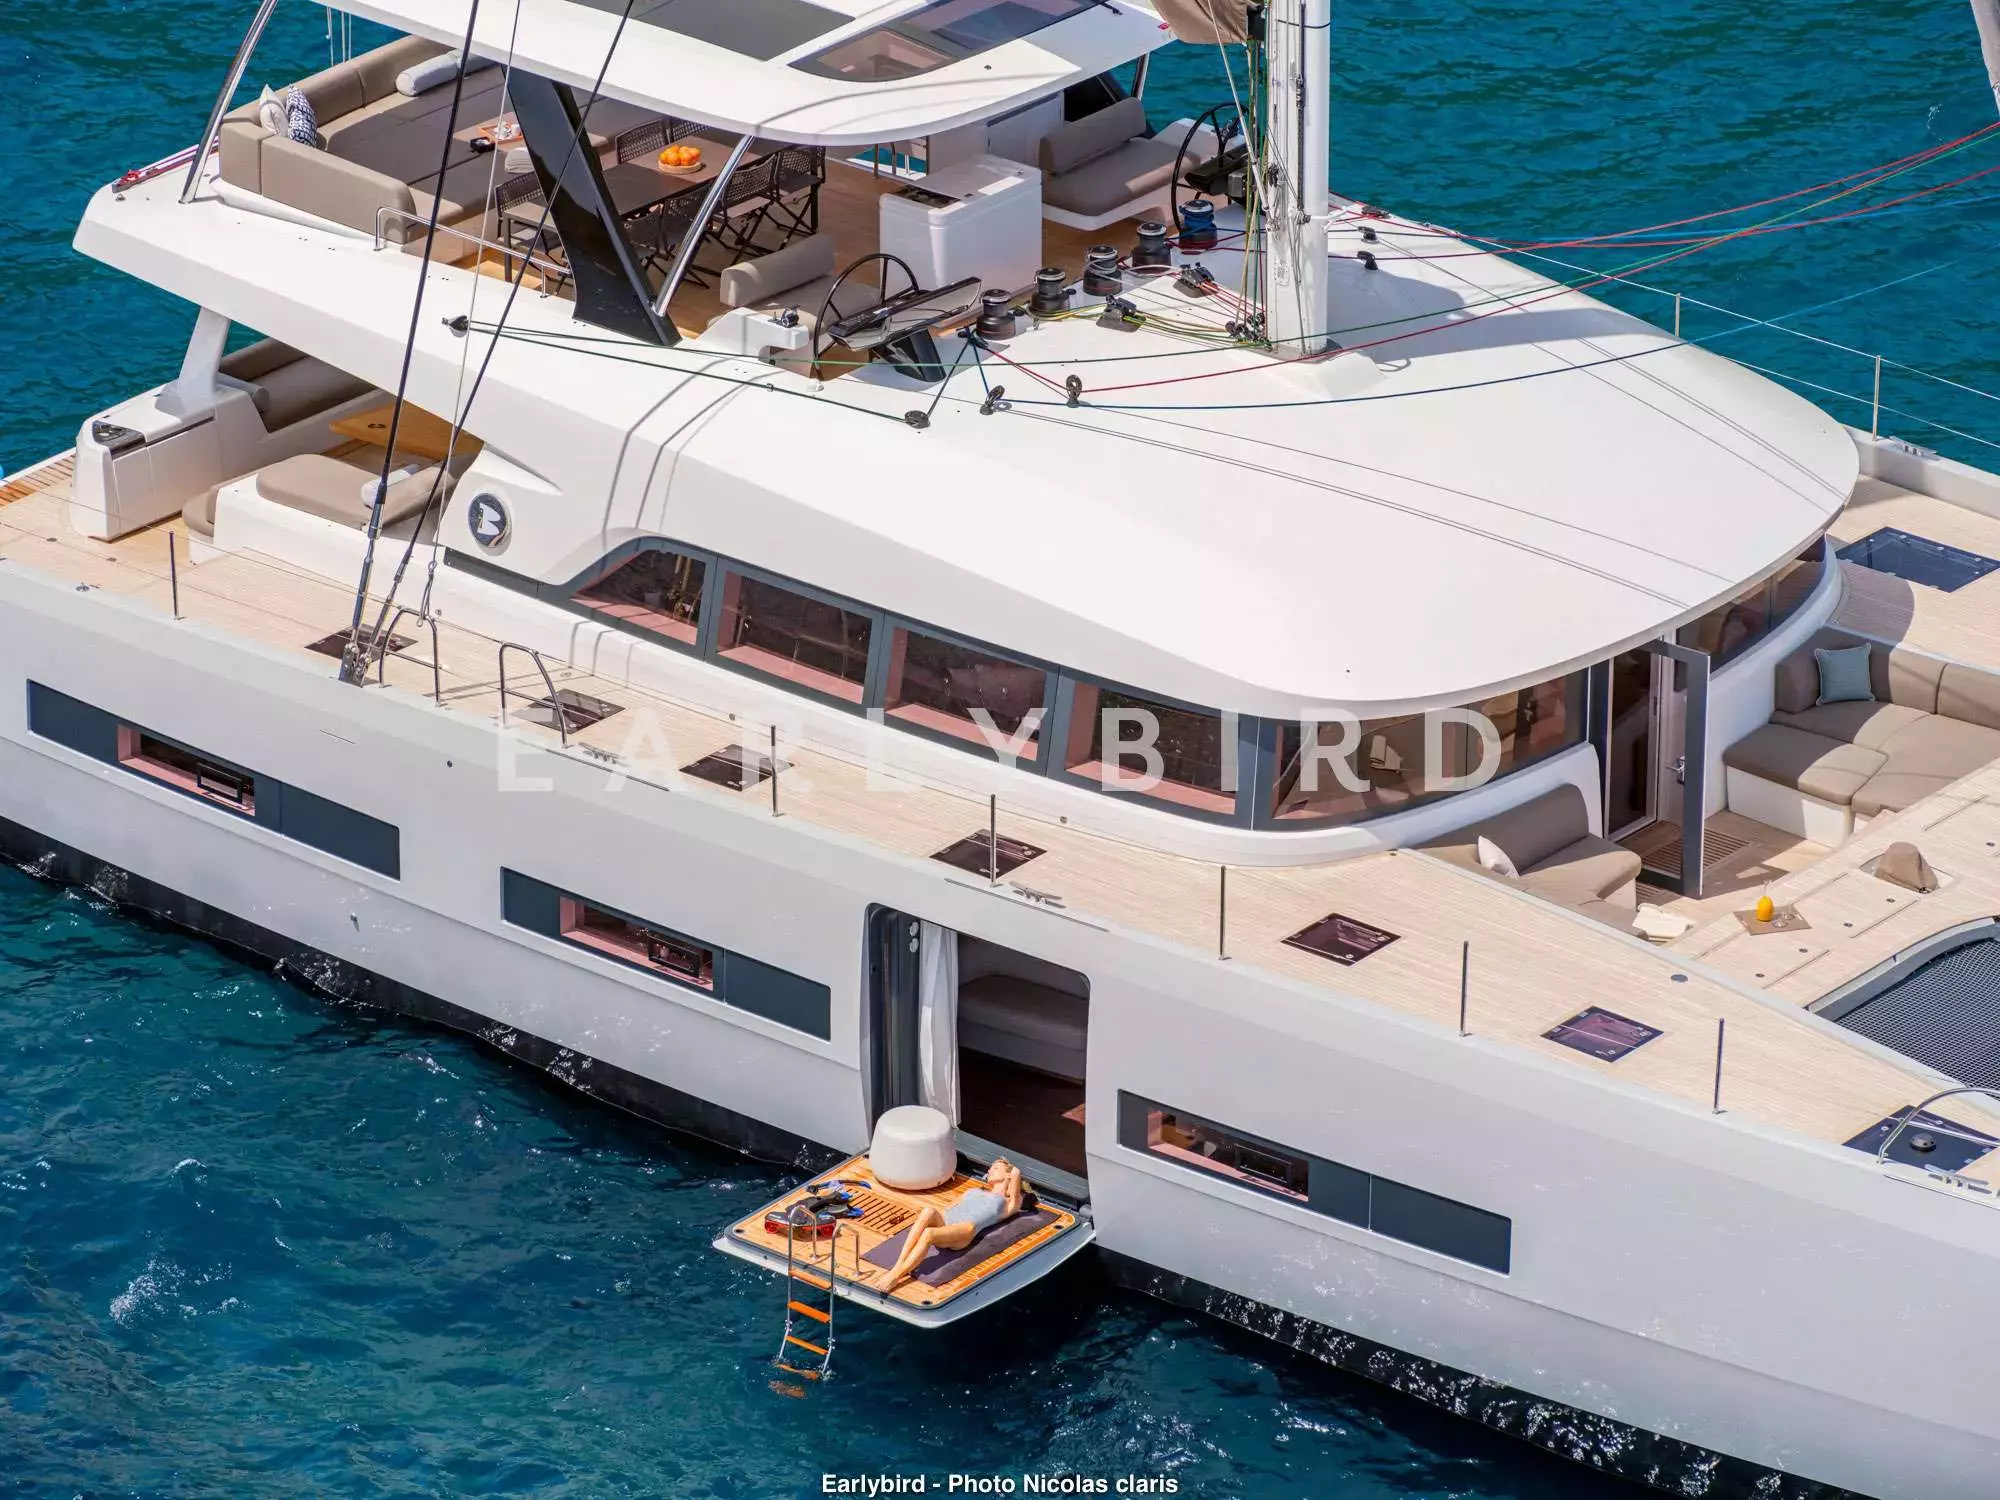 Earlybird by Lagoon - Special Offer for a private Luxury Catamaran Charter in Bequia with a crew